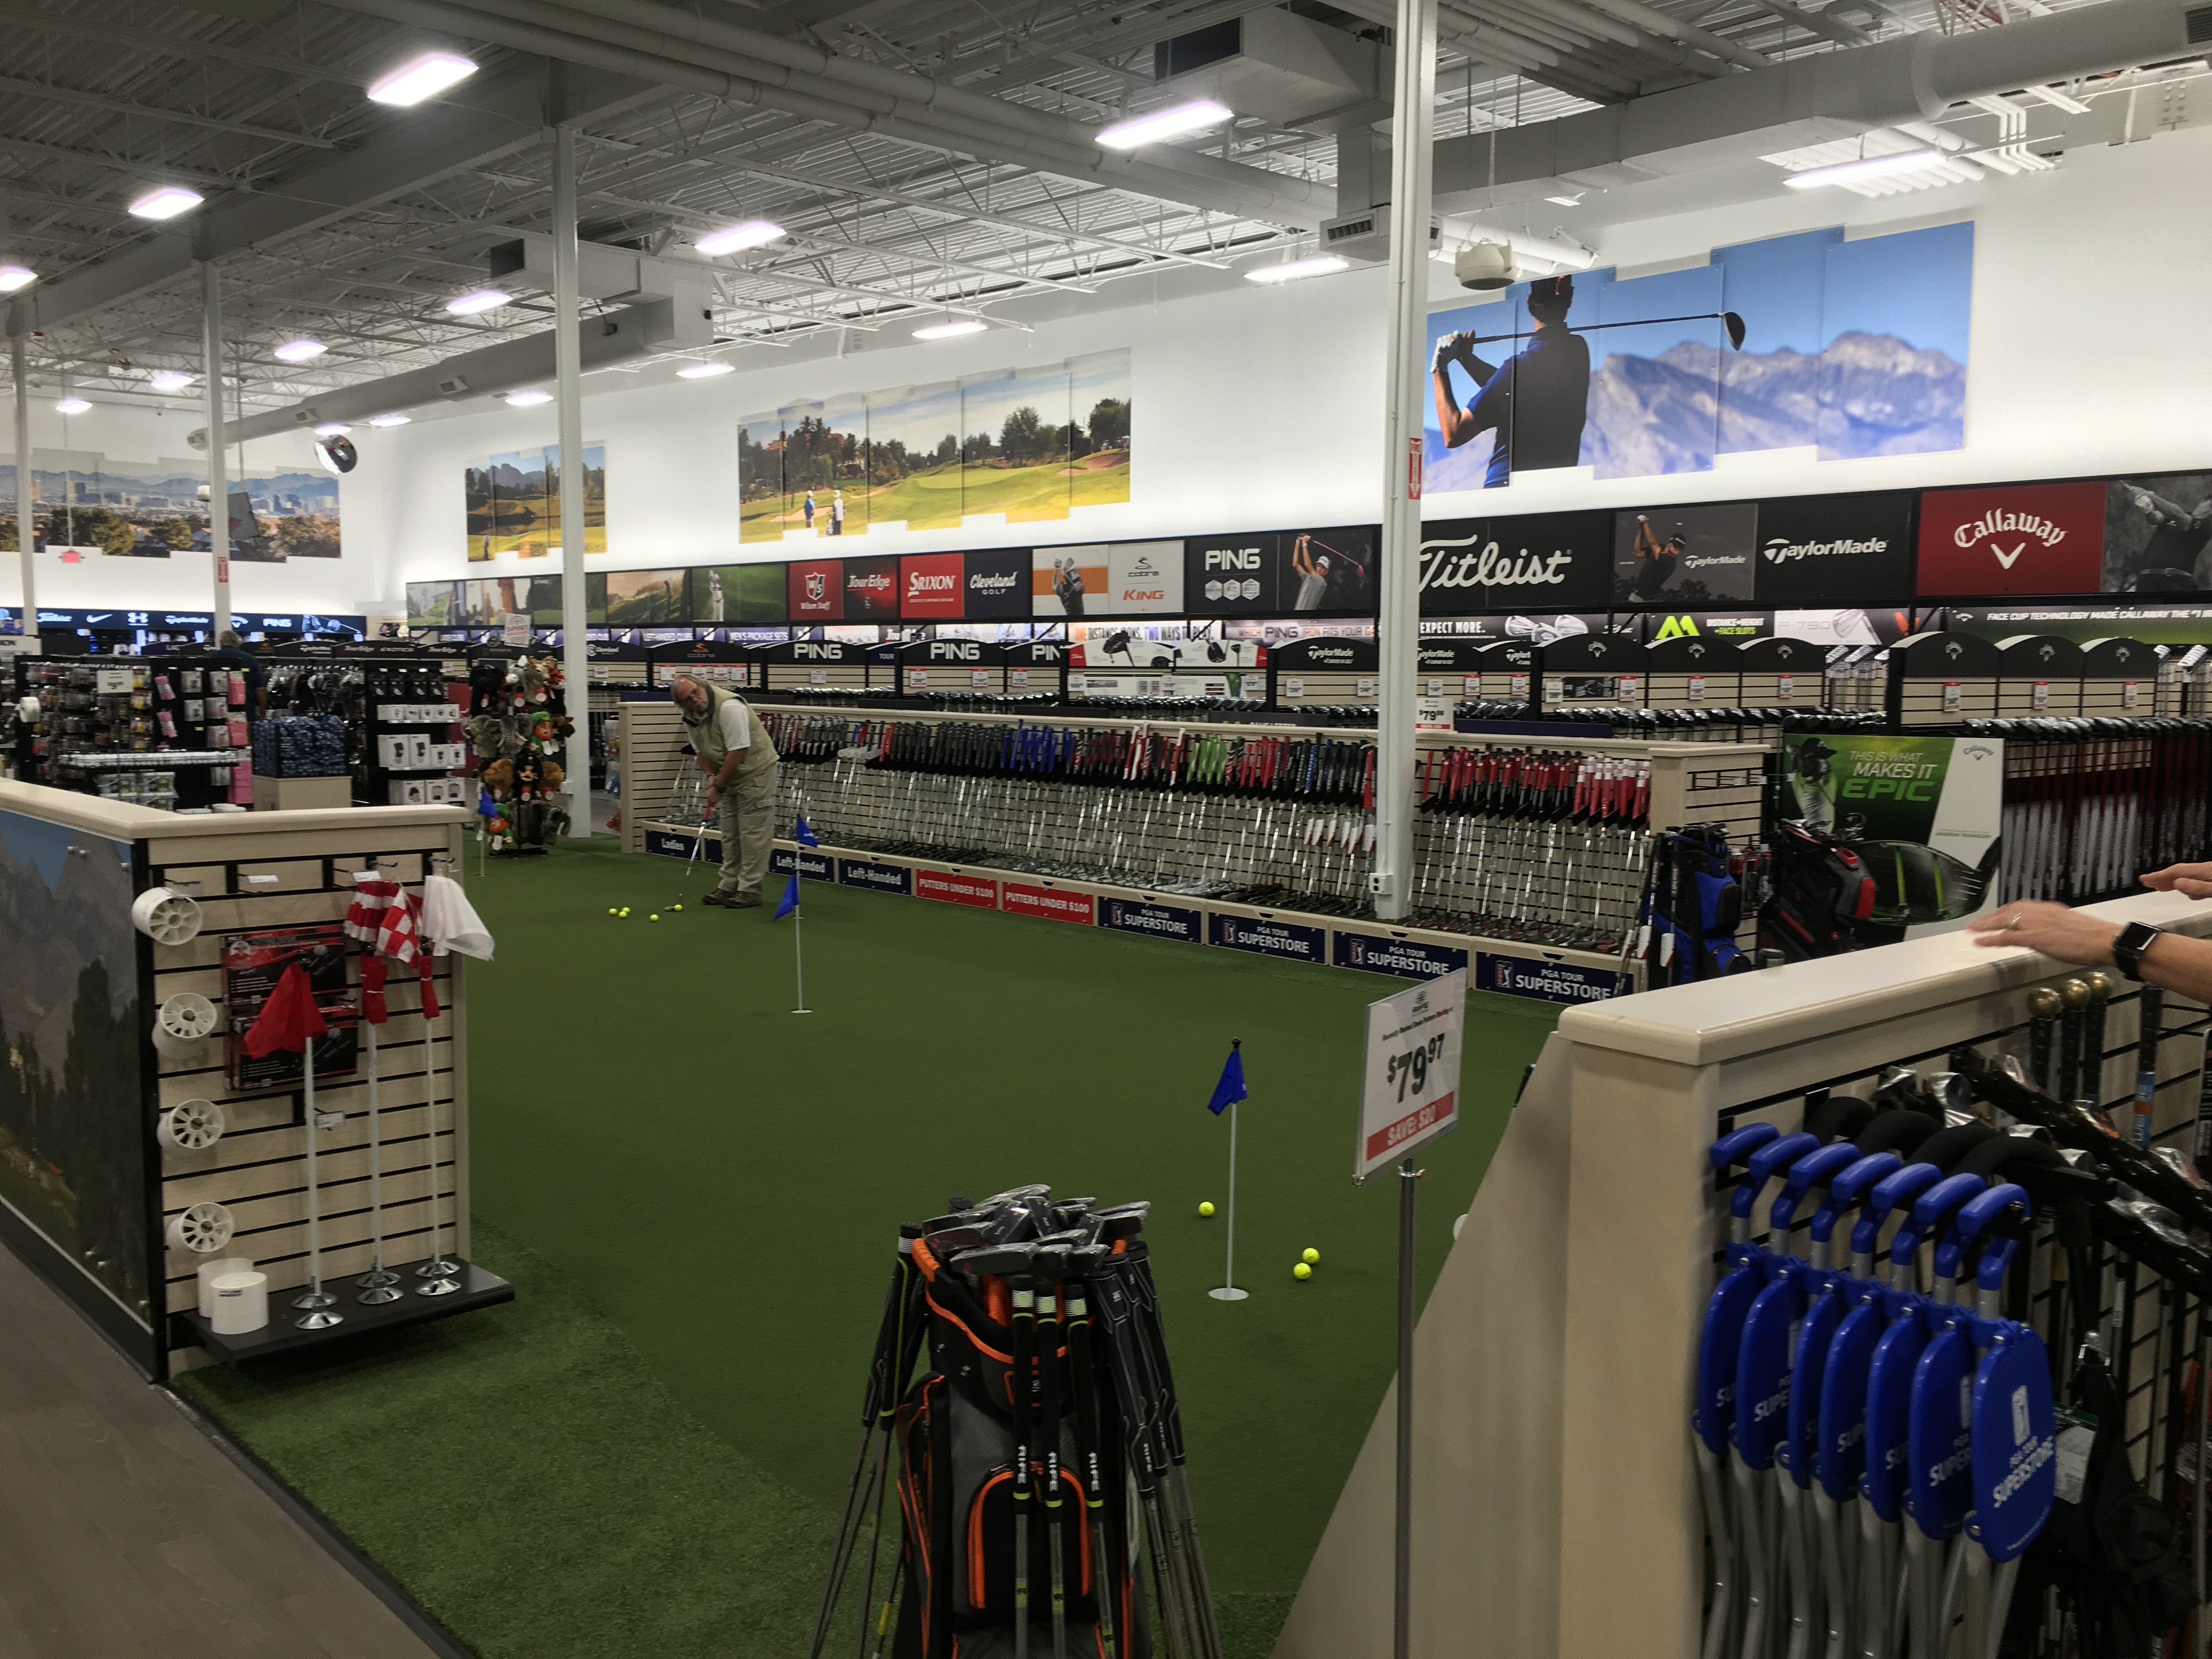 New Retail Golf Store in Downtown Summerlin Adds More Sports Business